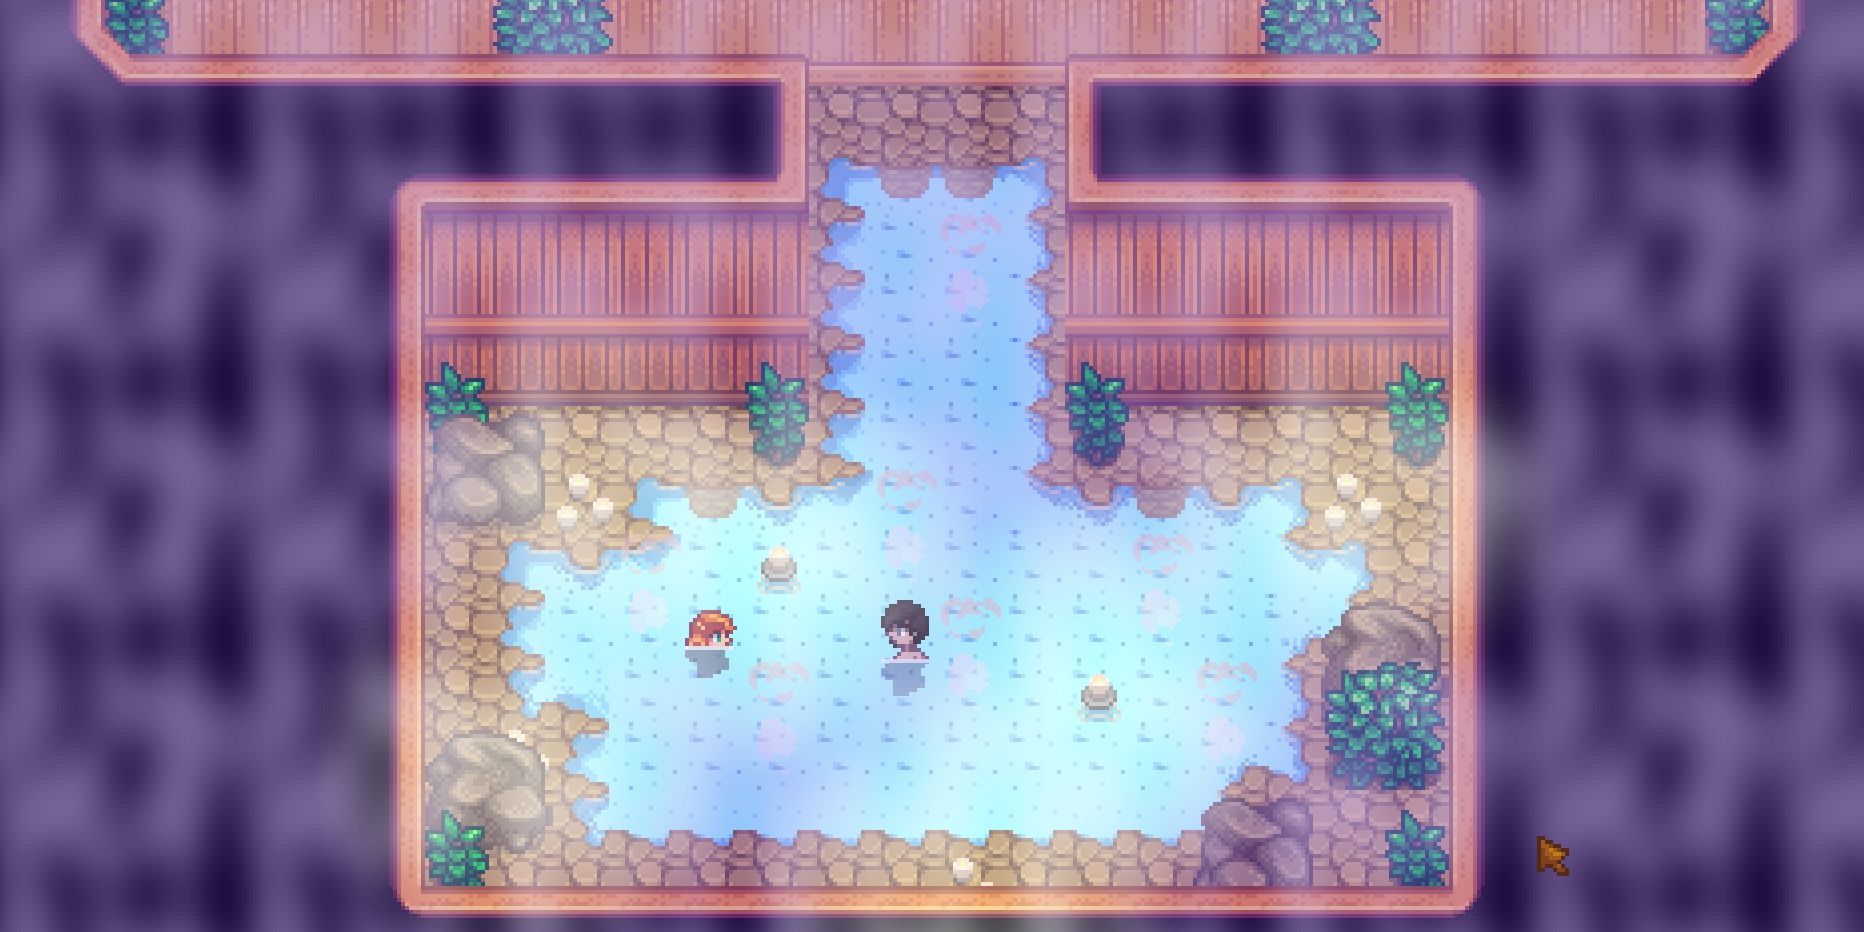 The Bathhouse Hot Spring mod in Stardew Valley